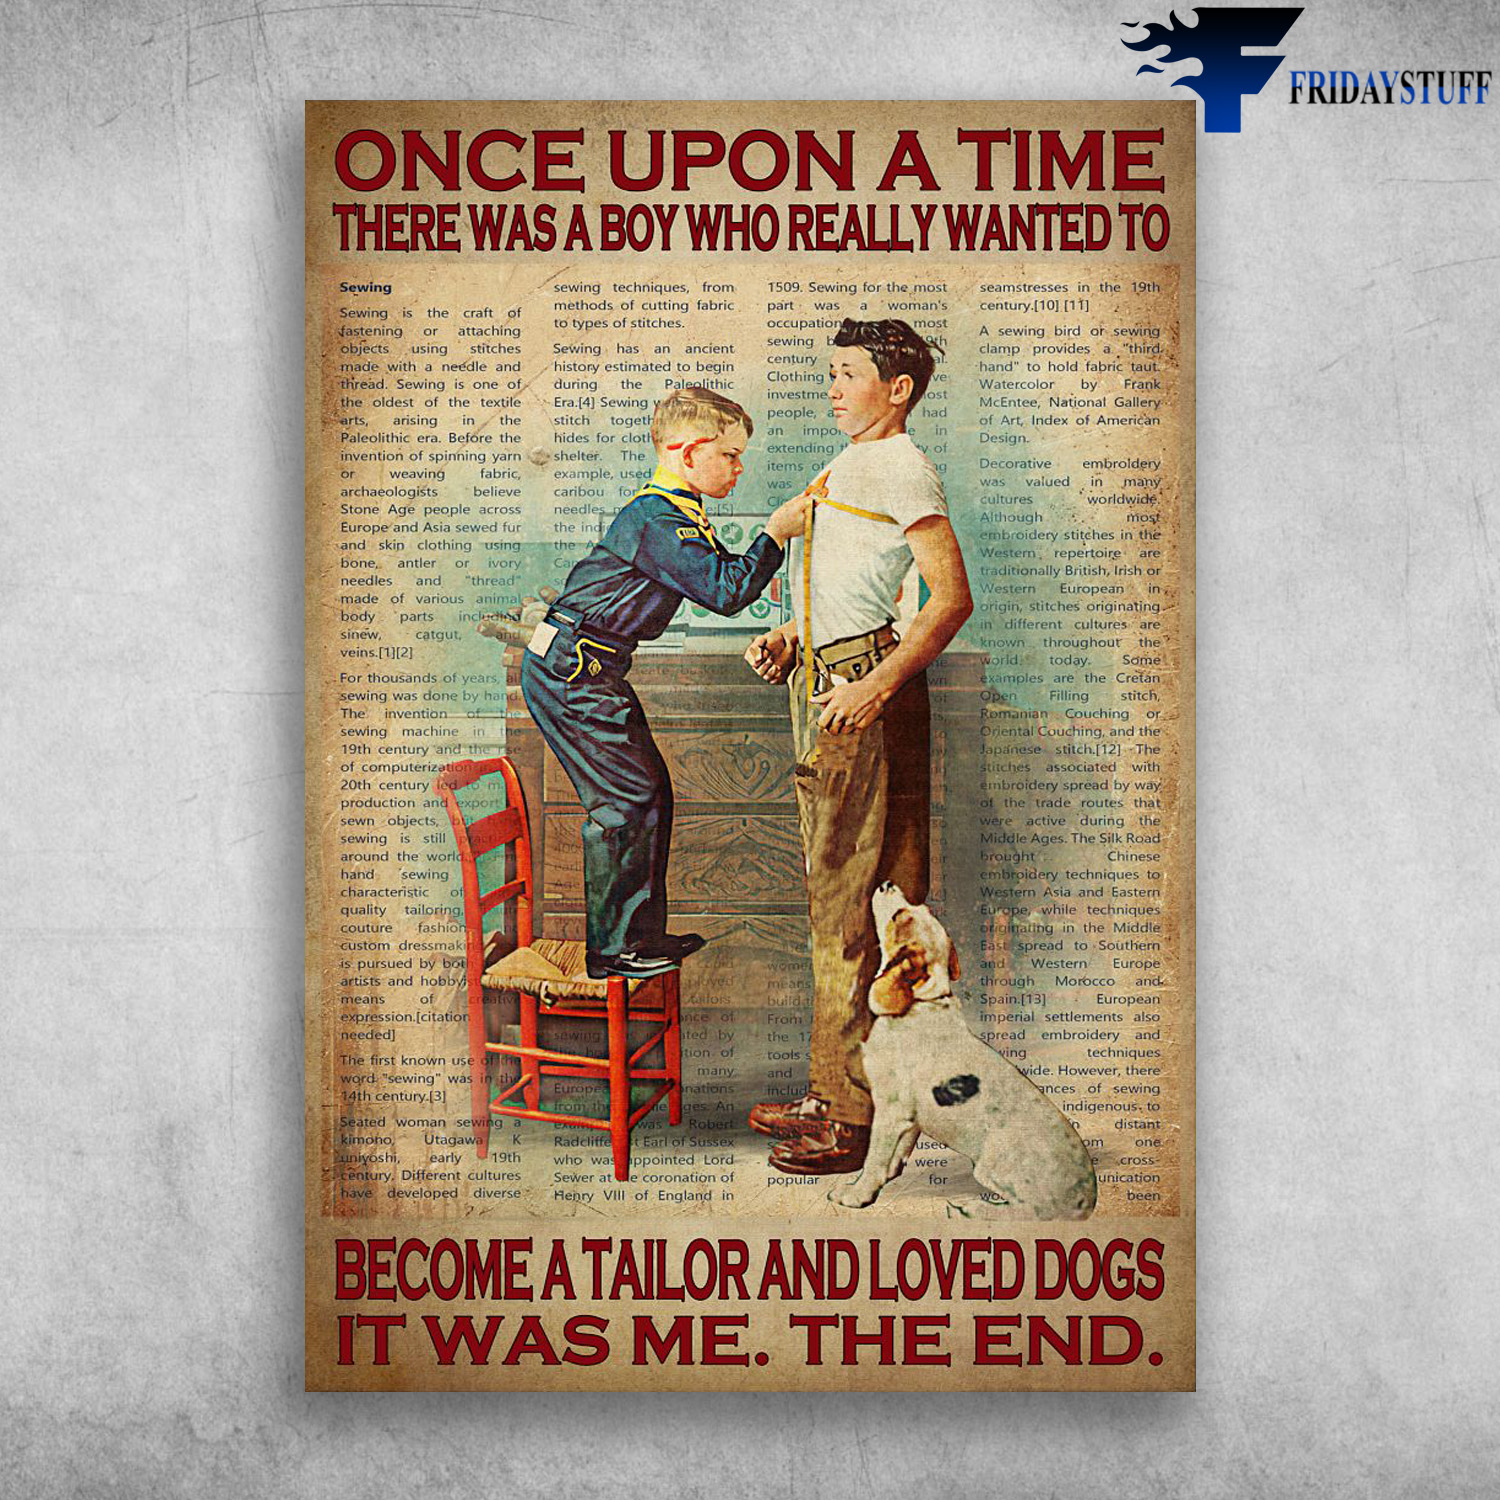 Tailor Boy, Dog - Once Upon A Time, There Was A Boy, Who Wanted To Become A Tailor And Loved Dogs, It Was Me, The End